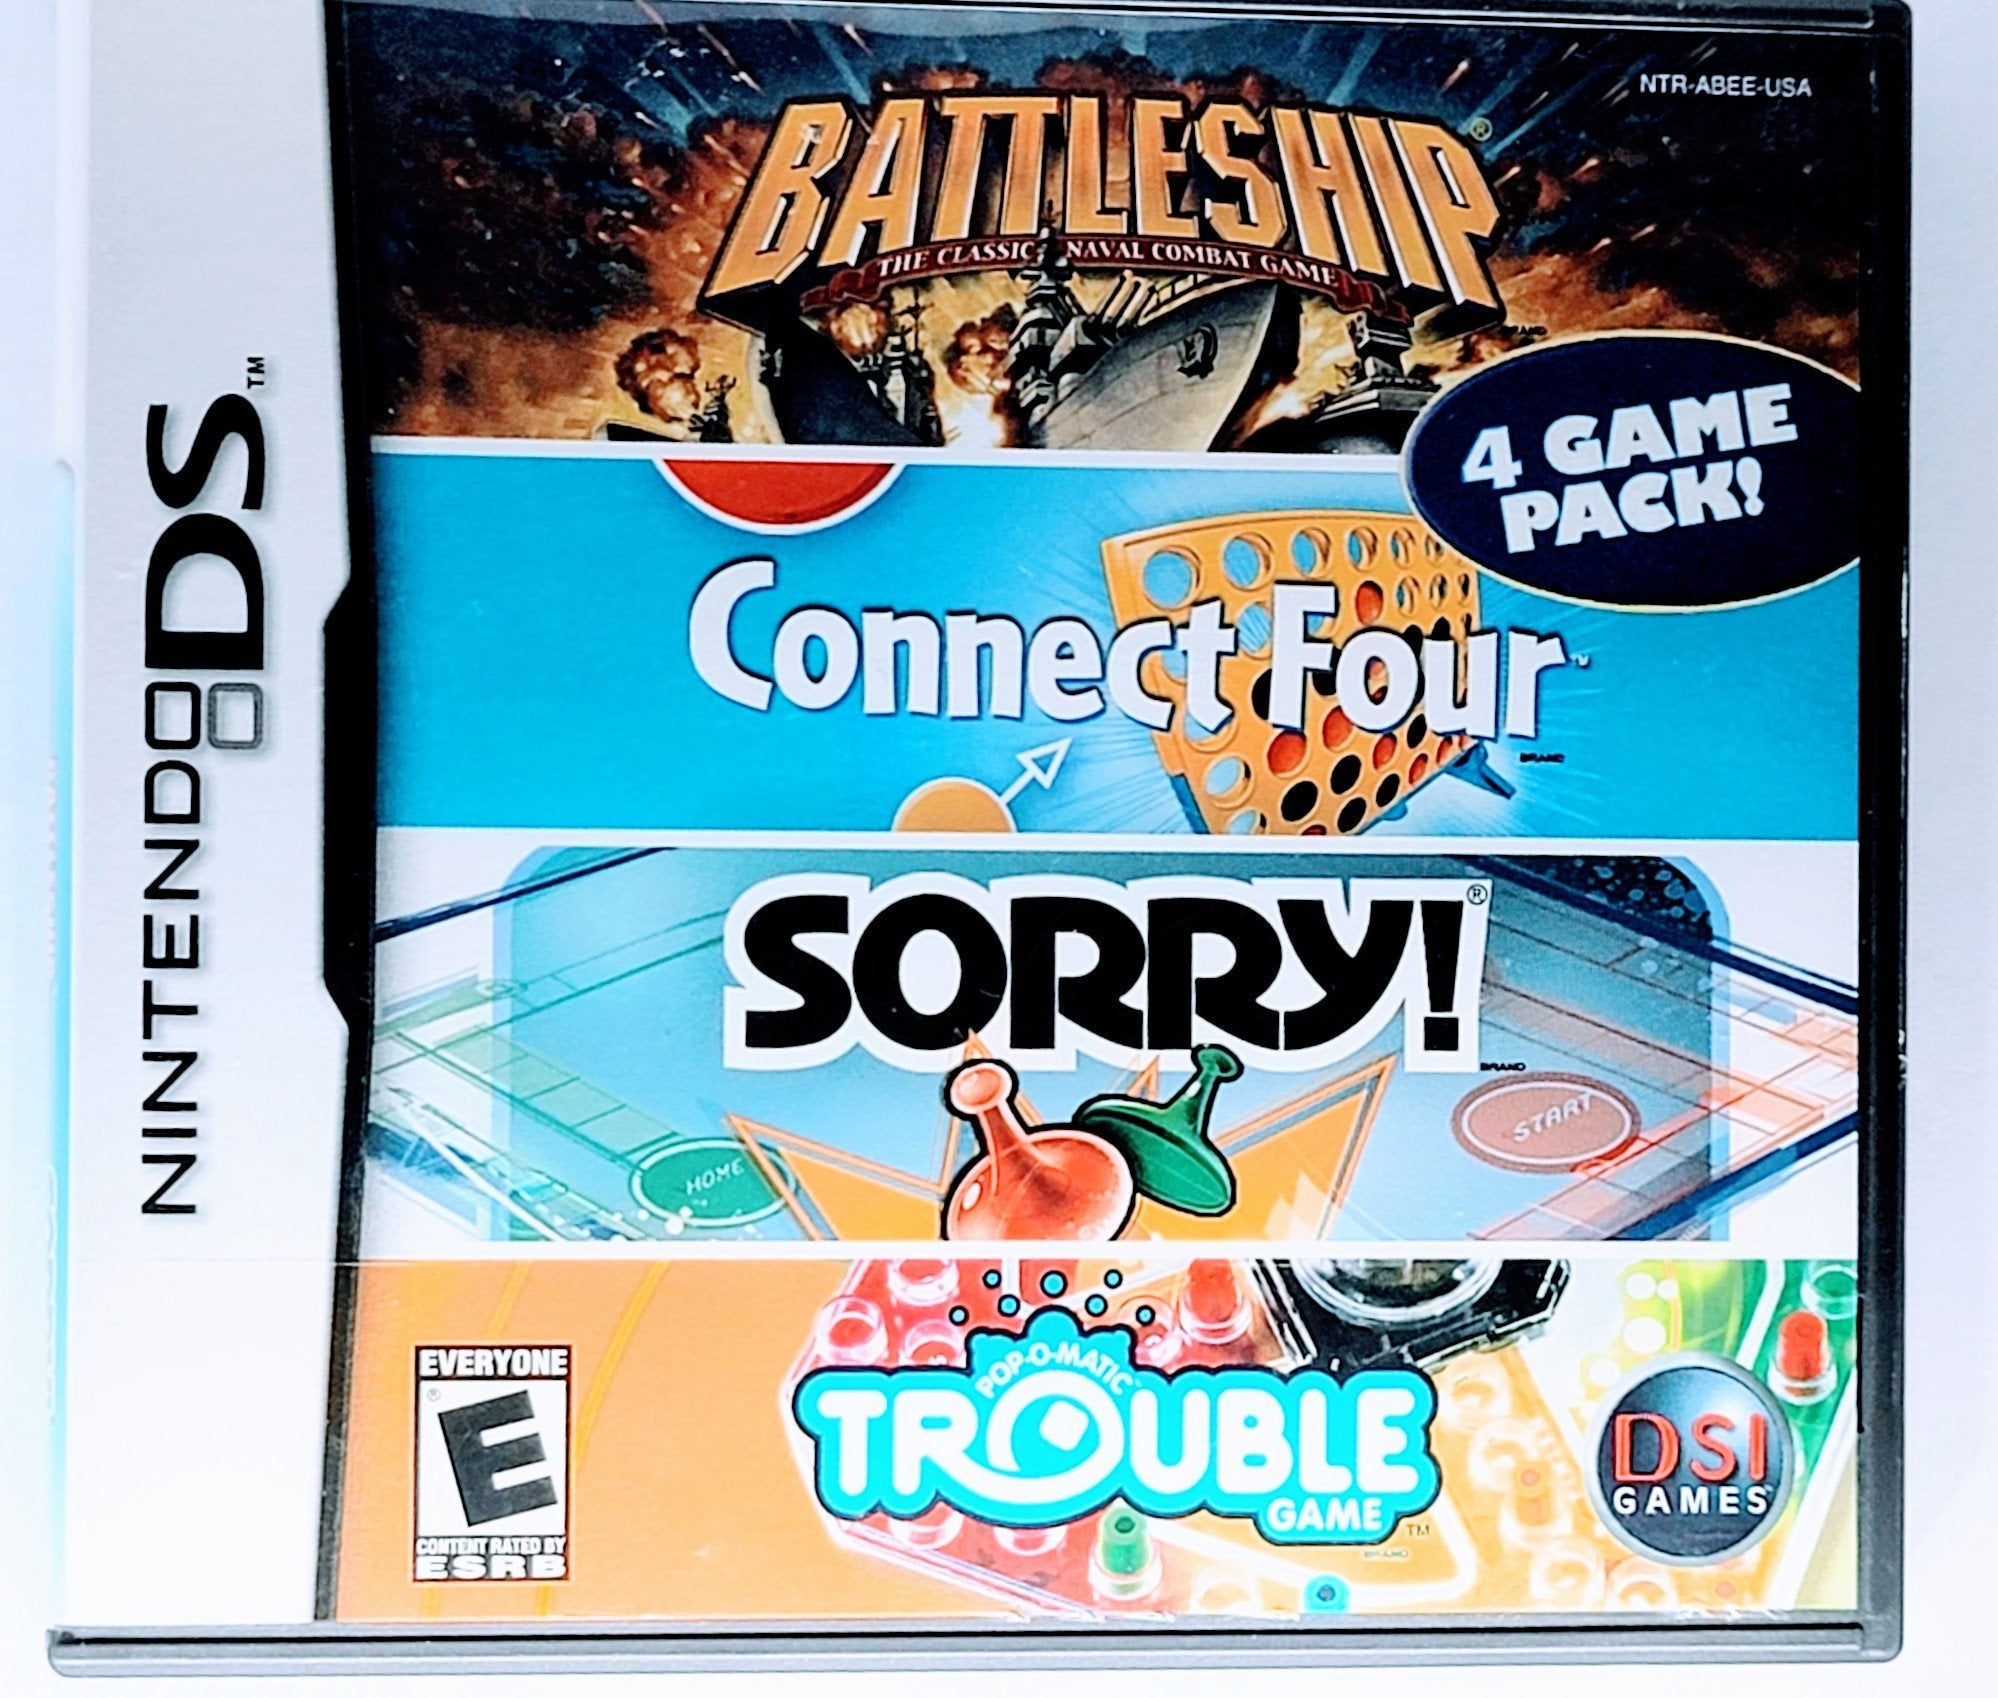 Battleship/Connect Four/Sorry!/Trouble - 4 Game Pack Nintendo DS: A Bundle of Classic Fun!  Xclusive Collectibles   